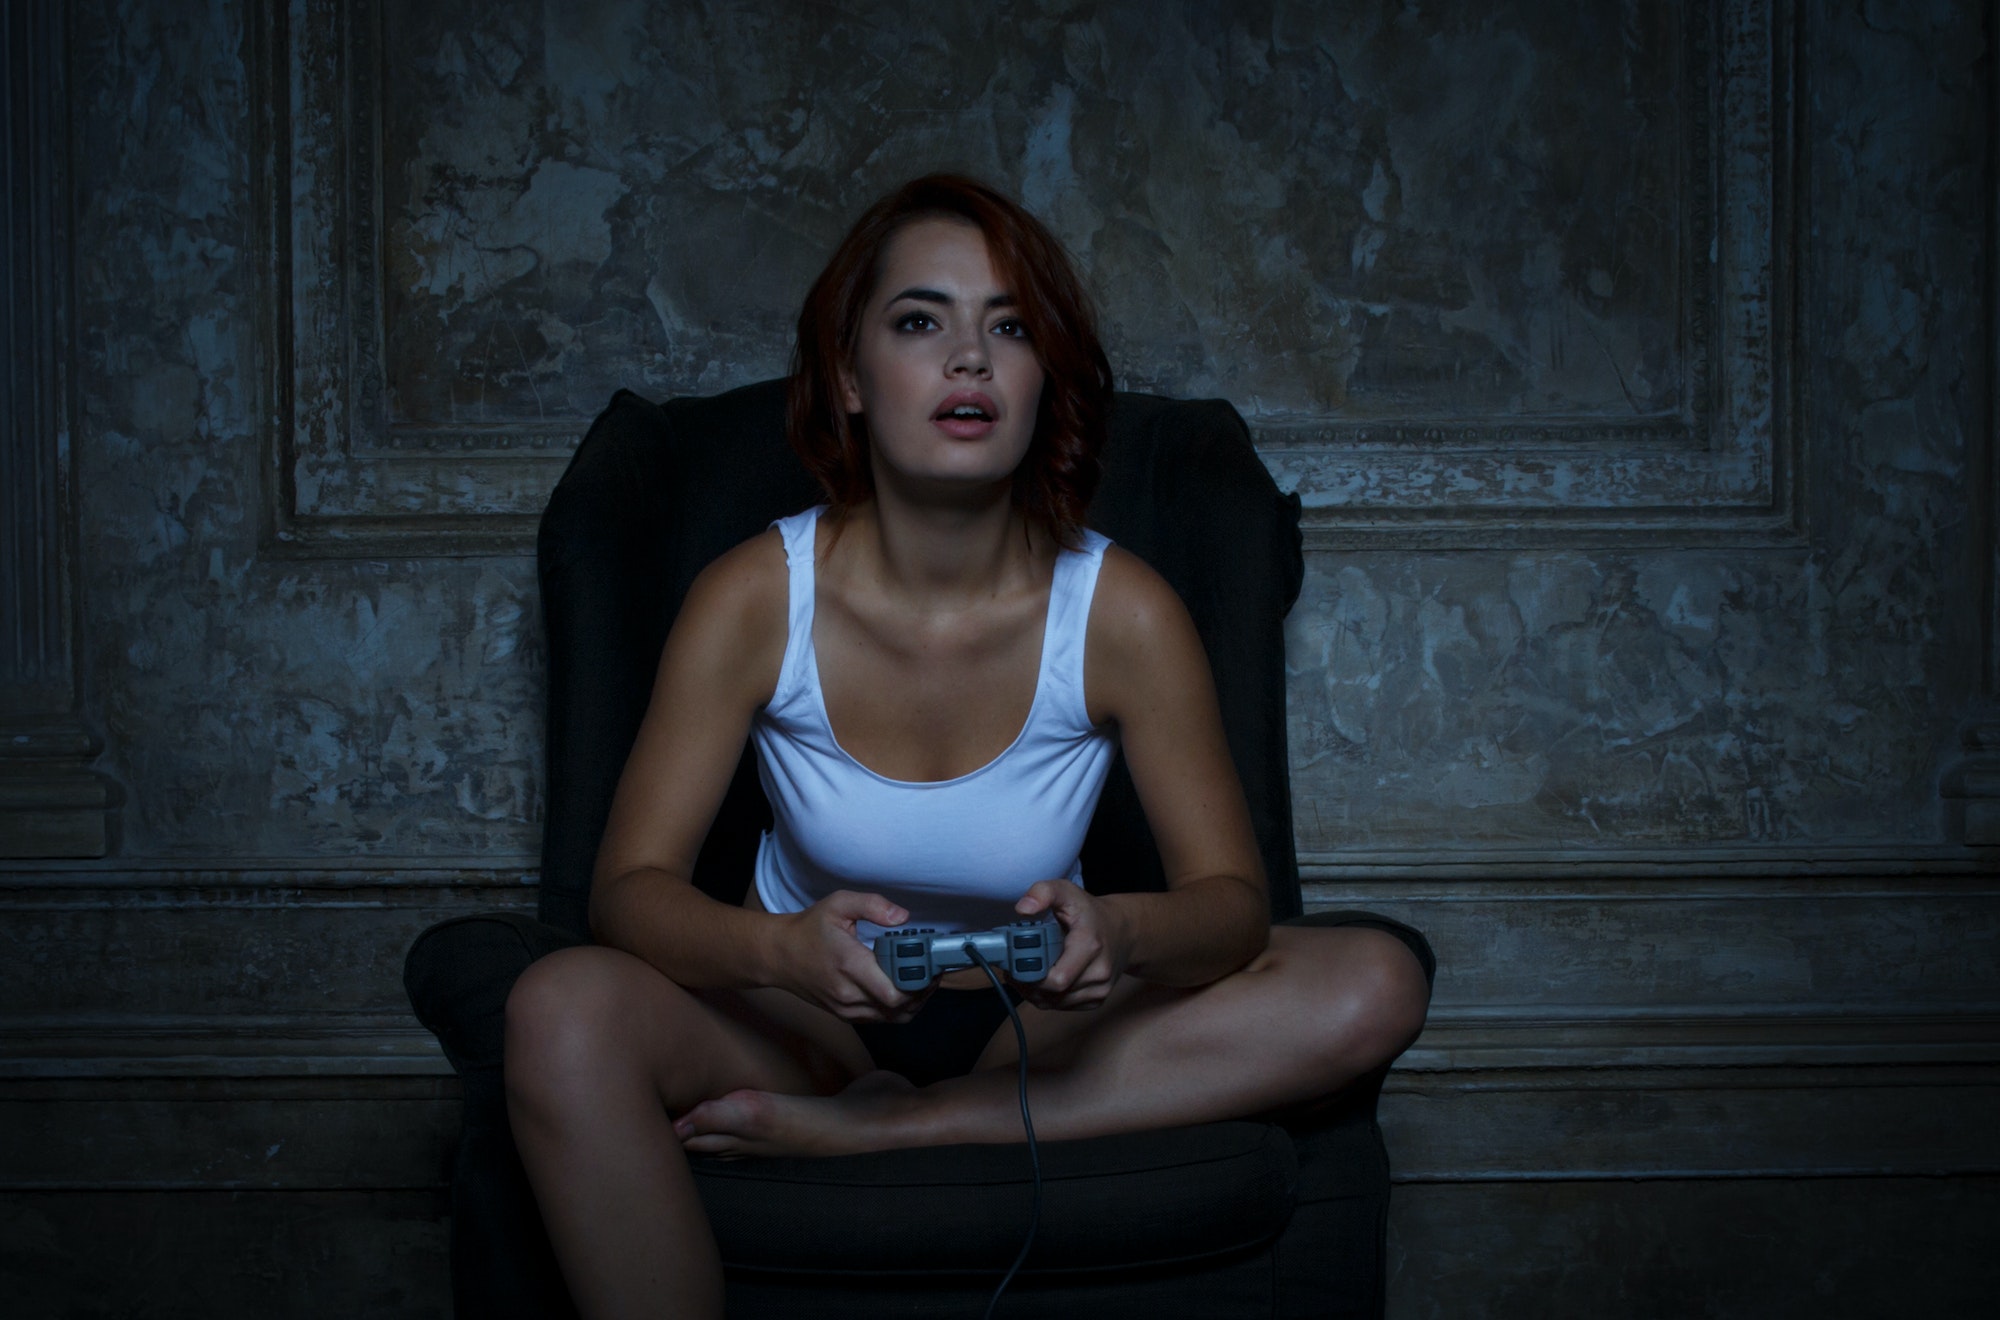 sexy woman with game pad playing video games